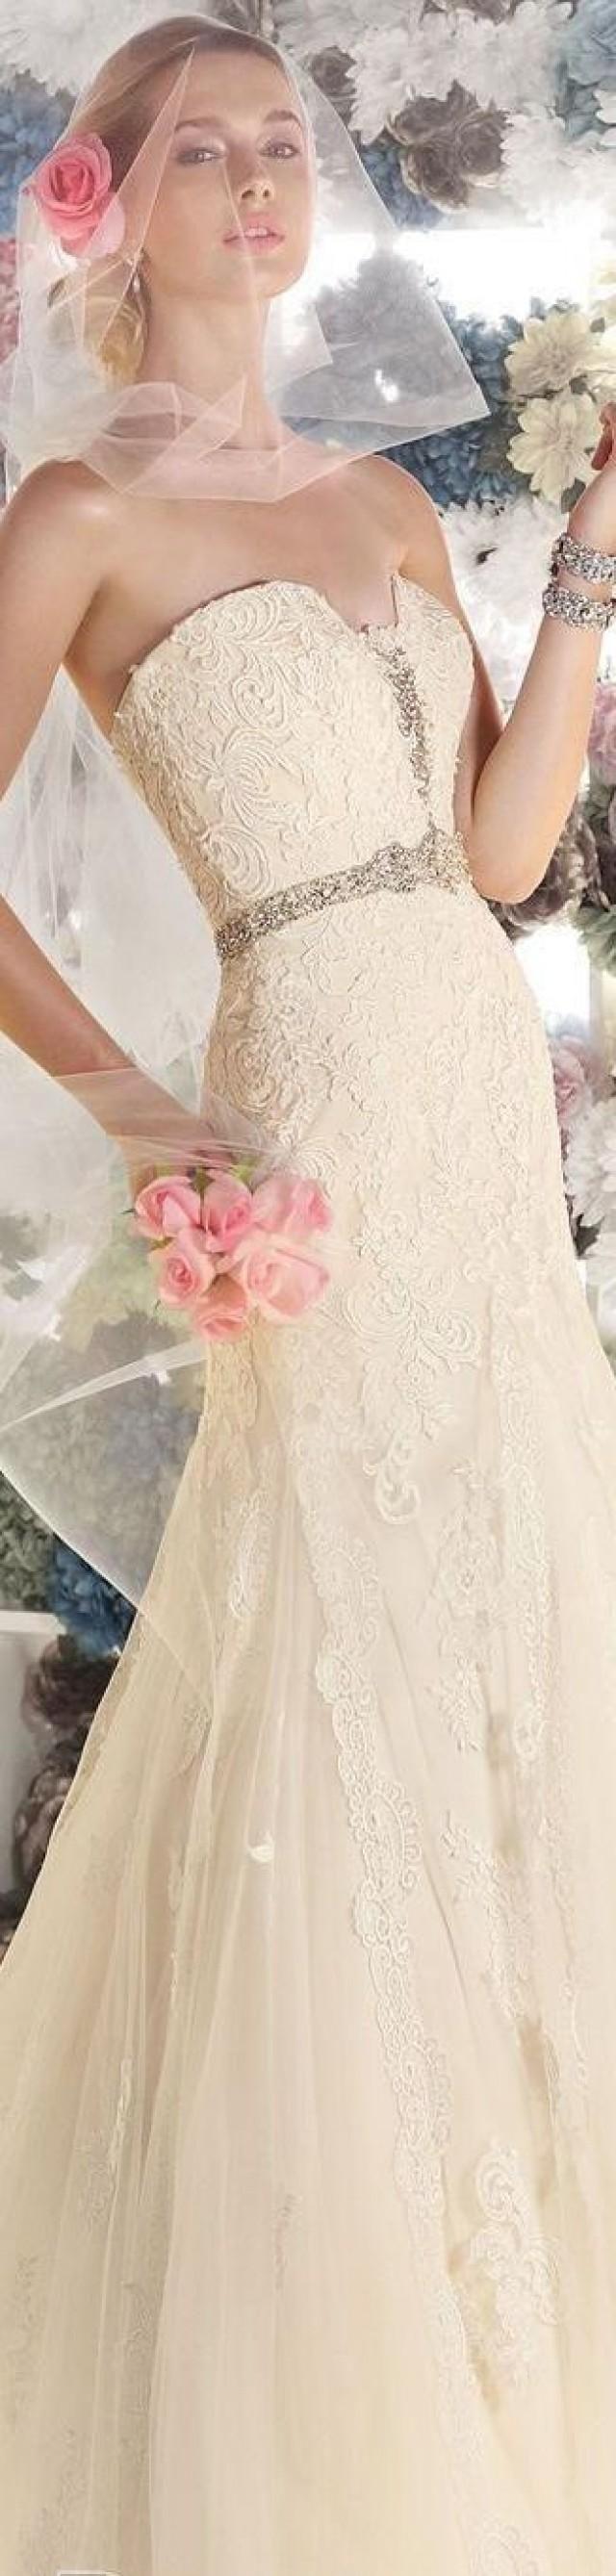 Wedding - Dress - Say Yes To This Dress #2159324